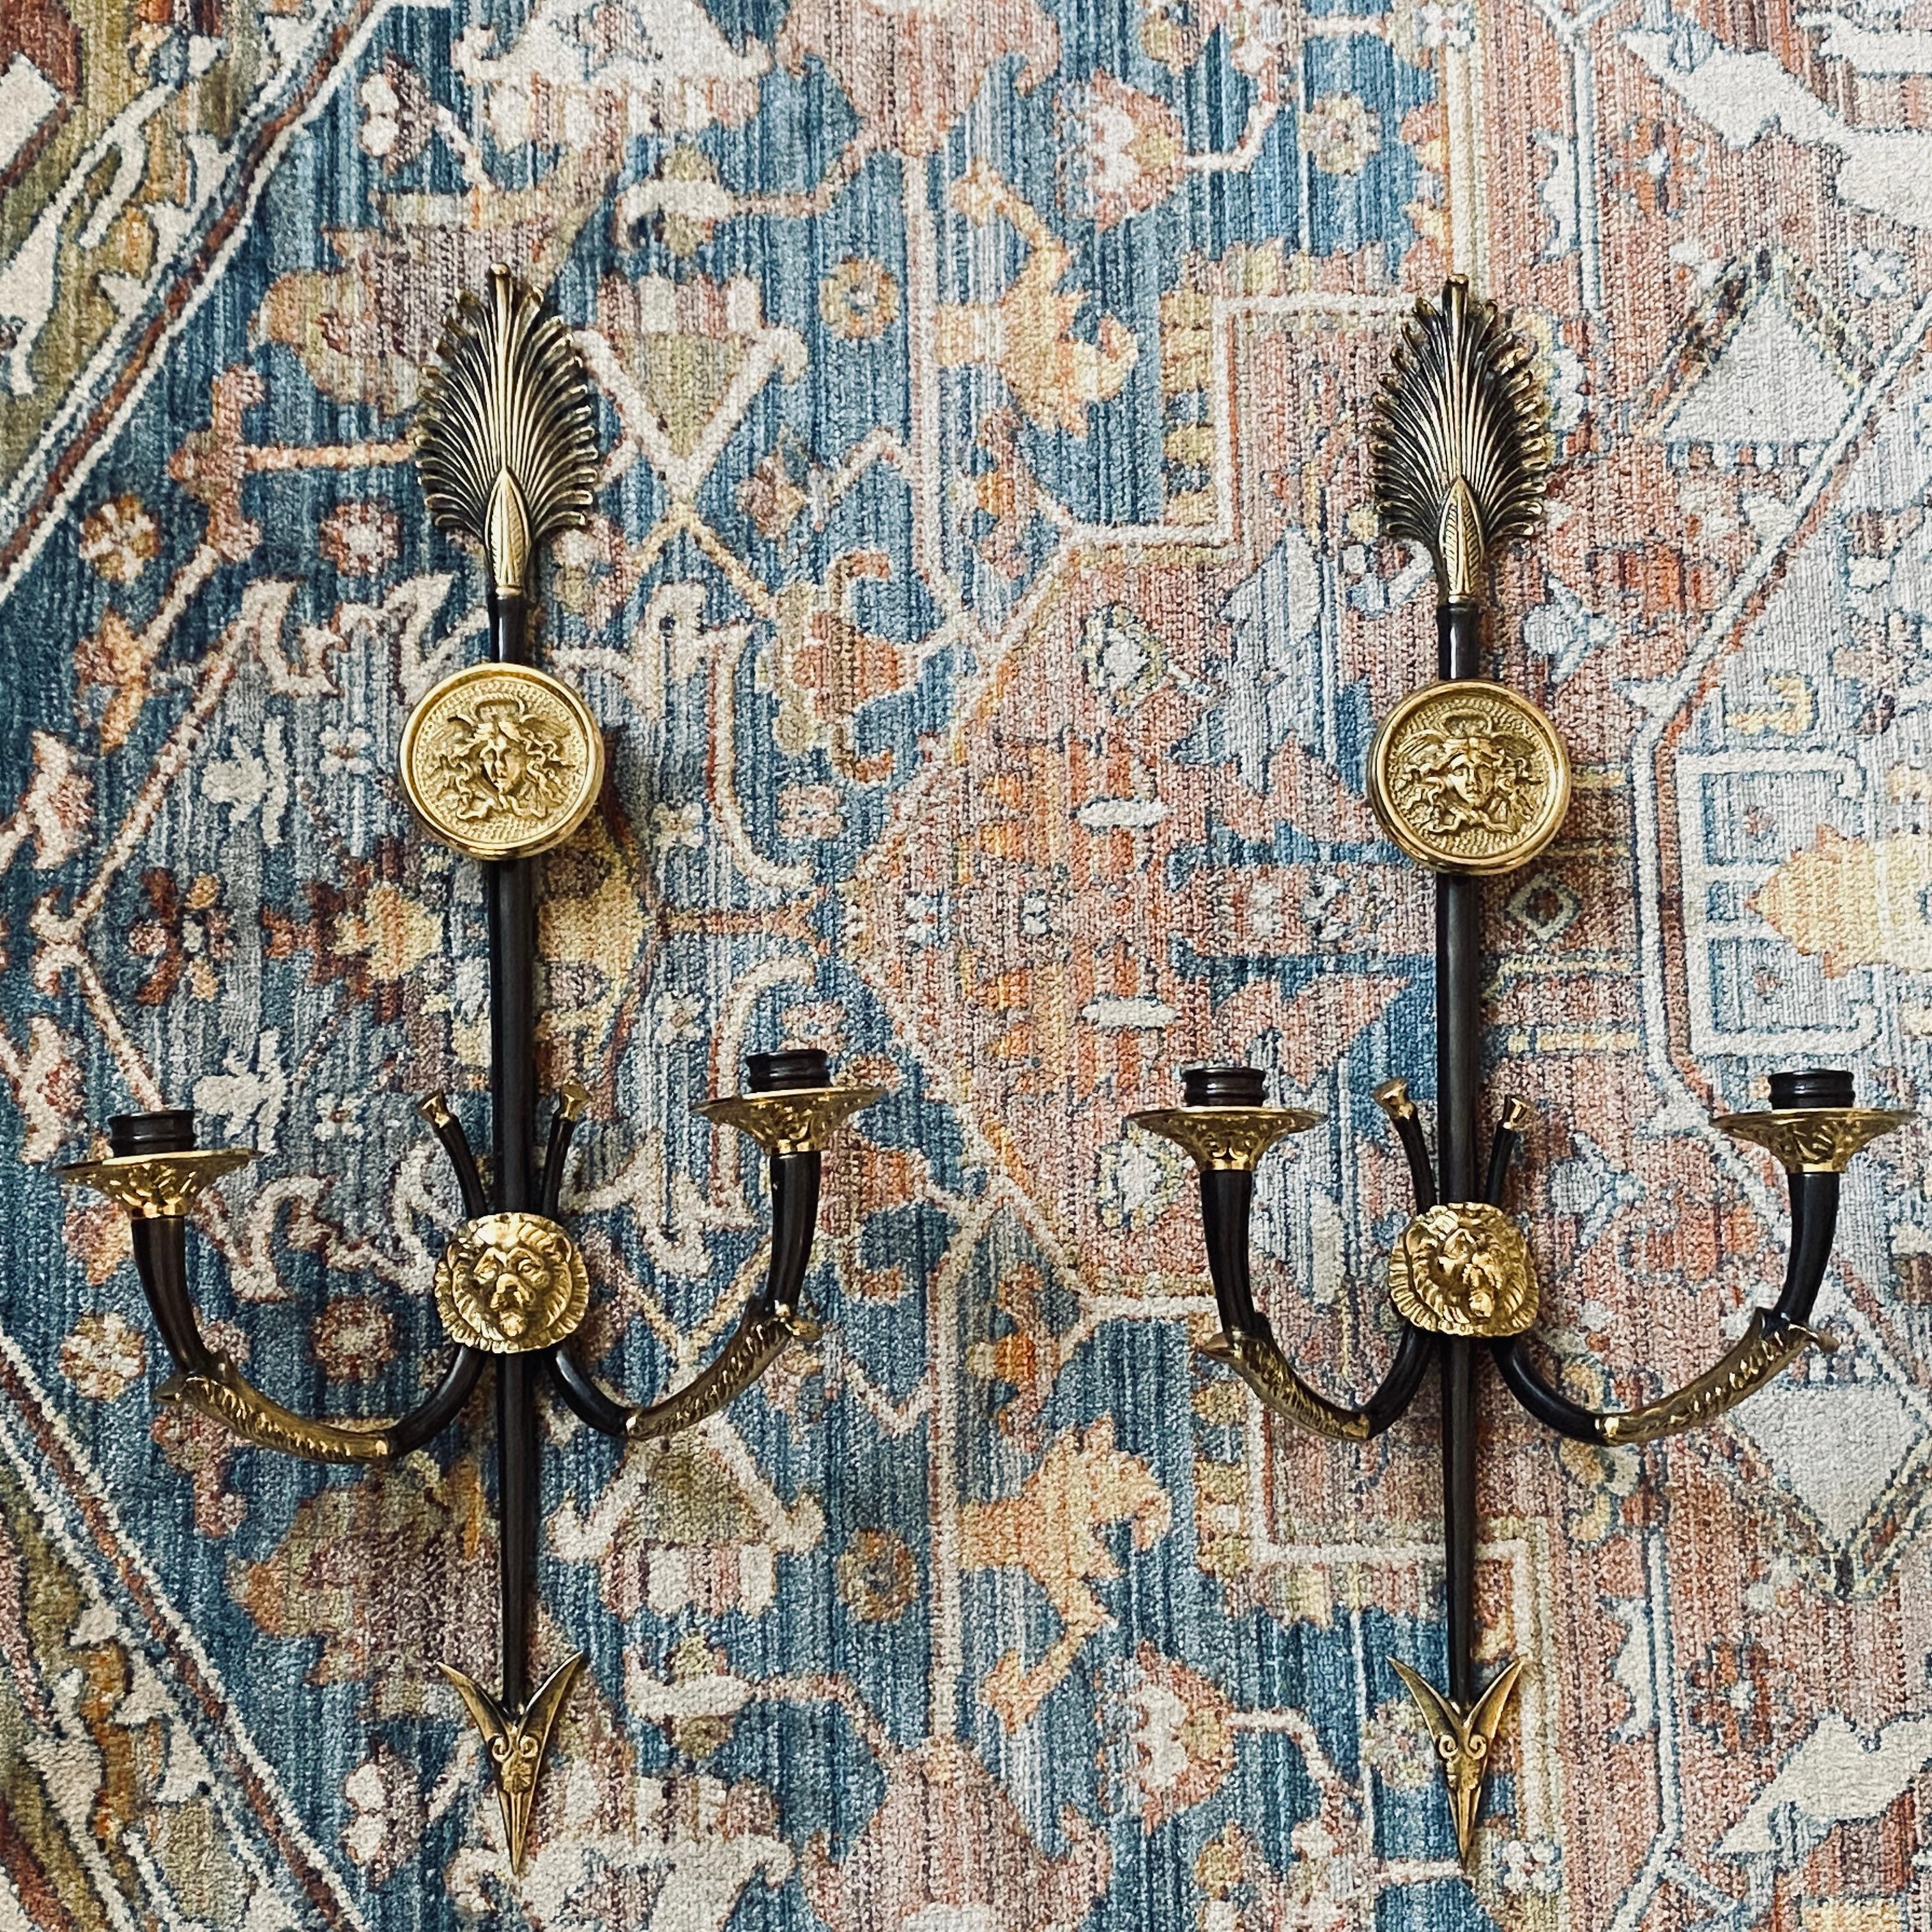 Pair of heavy solid brass finely detailed two arm candle sconces handmade by Decorative Crafts Inc. featuring vertical feathered arrow or spear with a lions head holding the decorative arms.